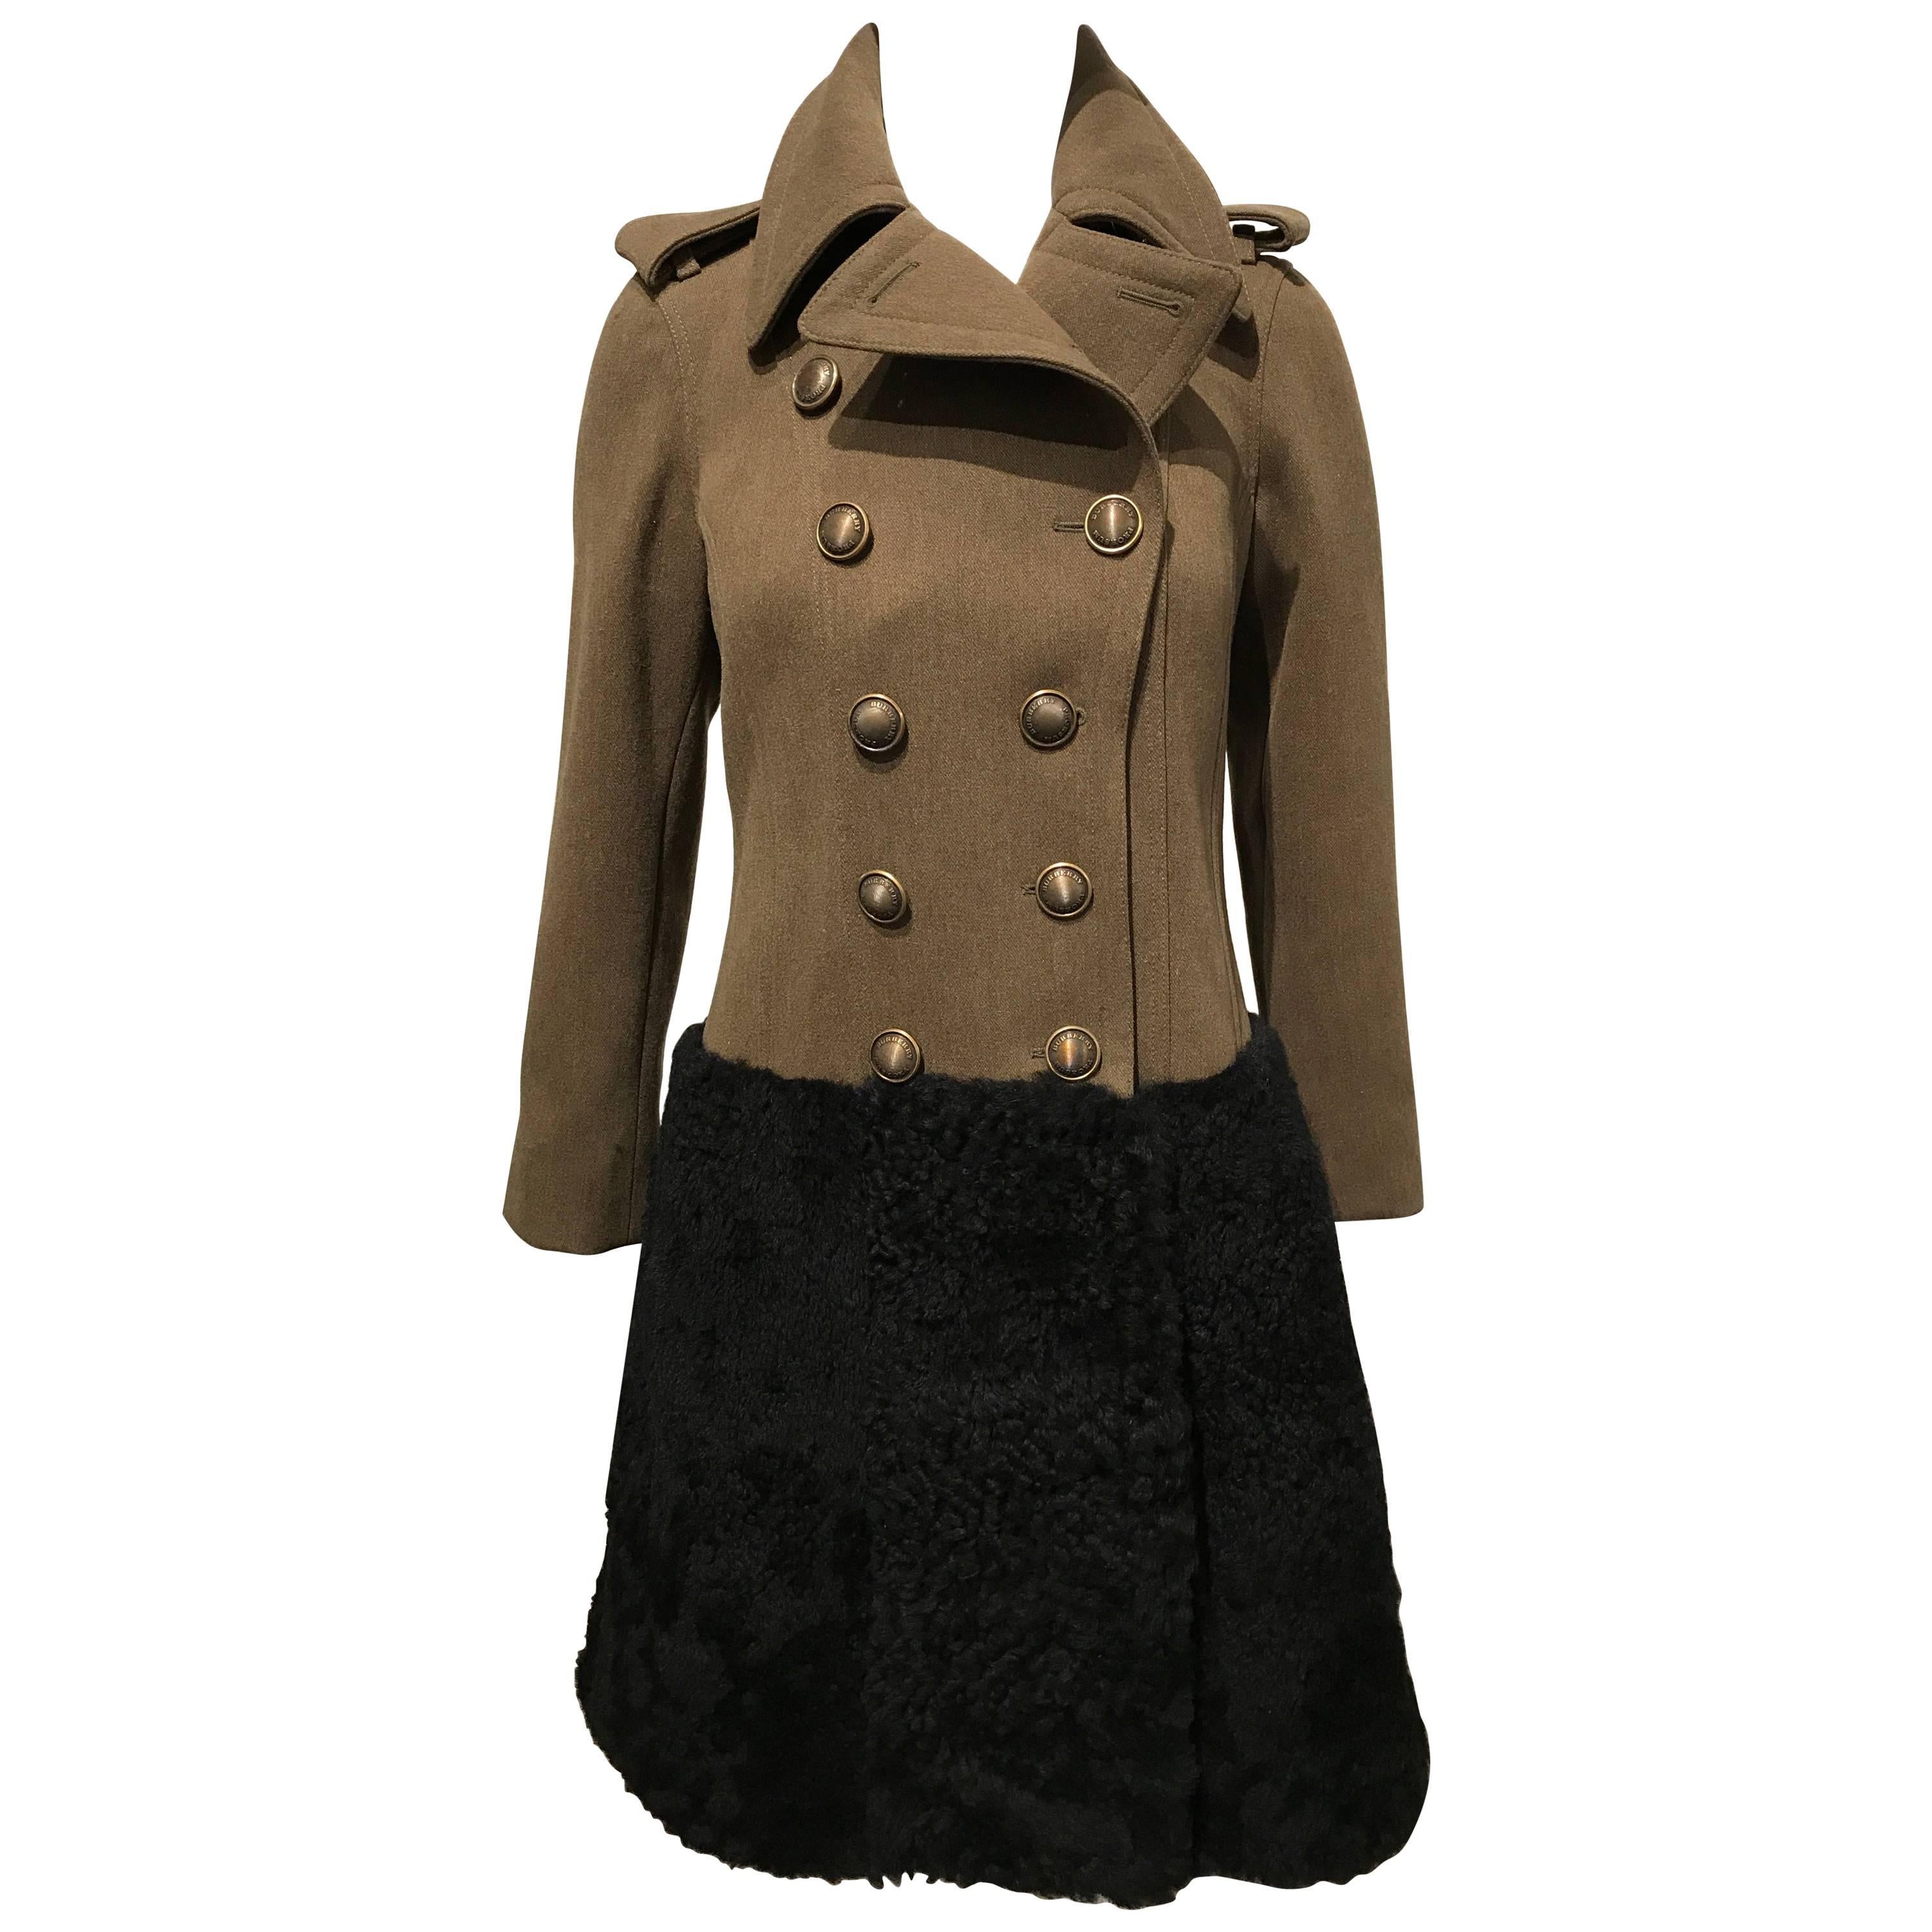 Burberry Prorsum Army Green Wool Coat With Black Shearling Skirt Sz 38 (Us2) For Sale